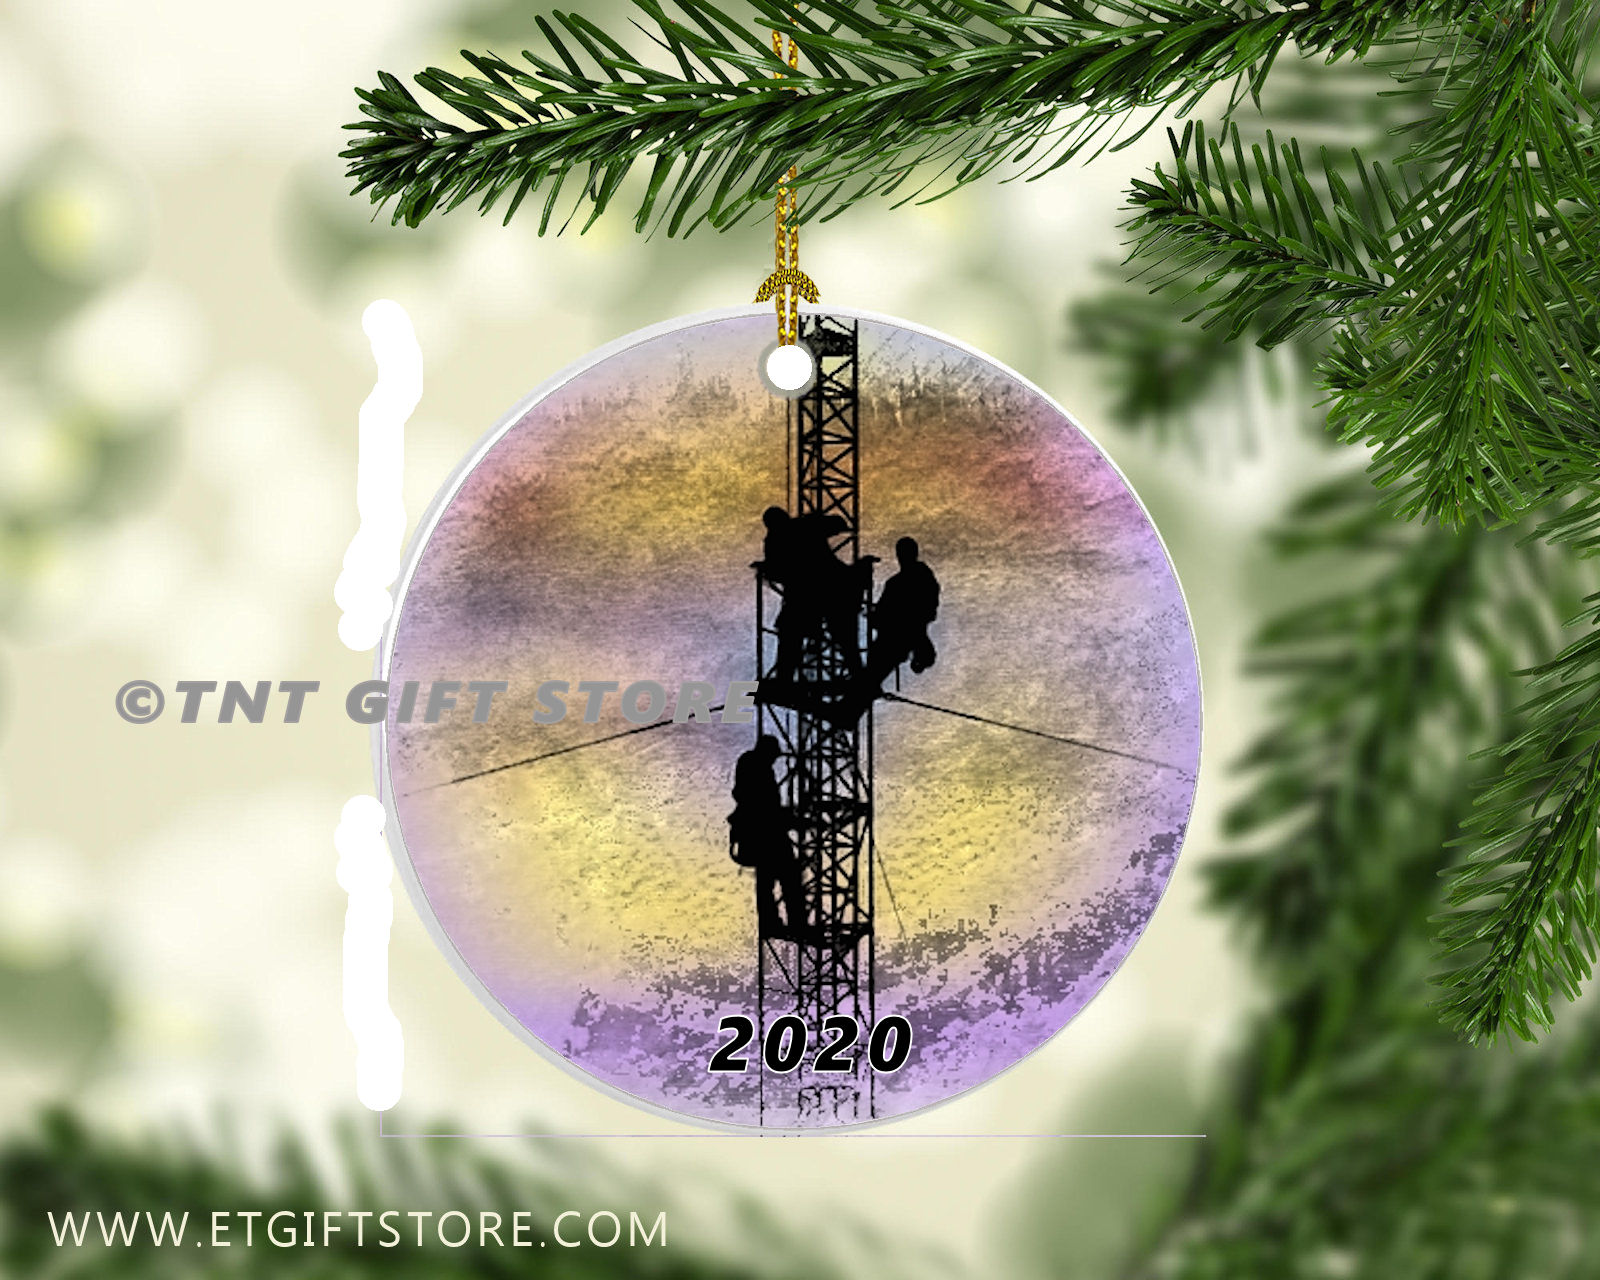 Tower Technicians Cell phone towers tree ornament